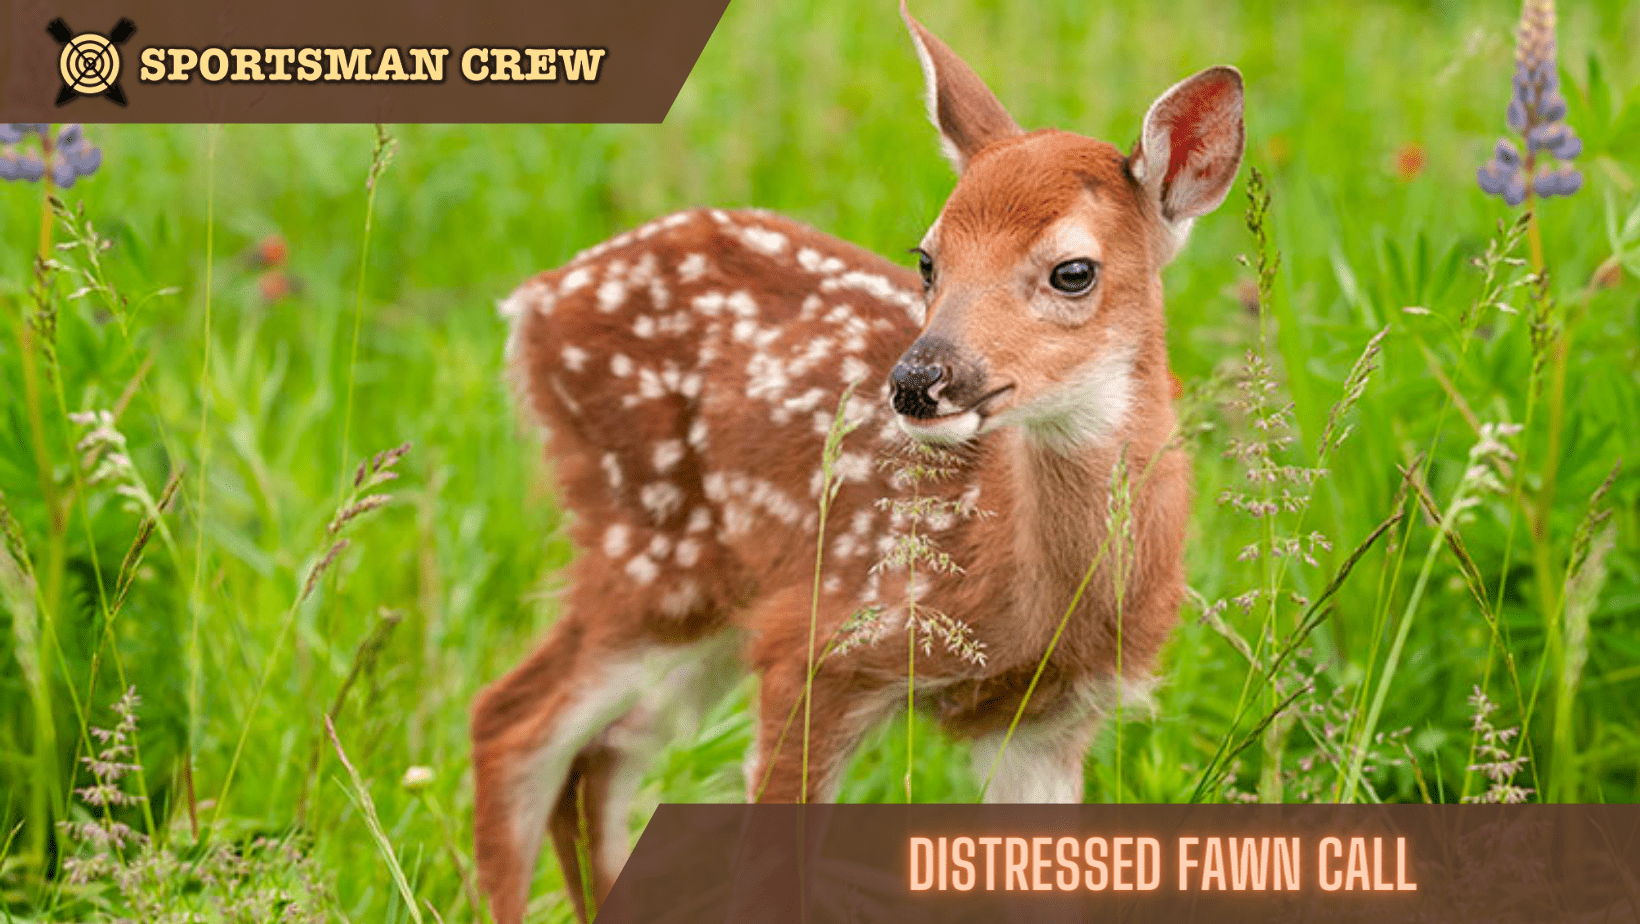 Distressed fawn call